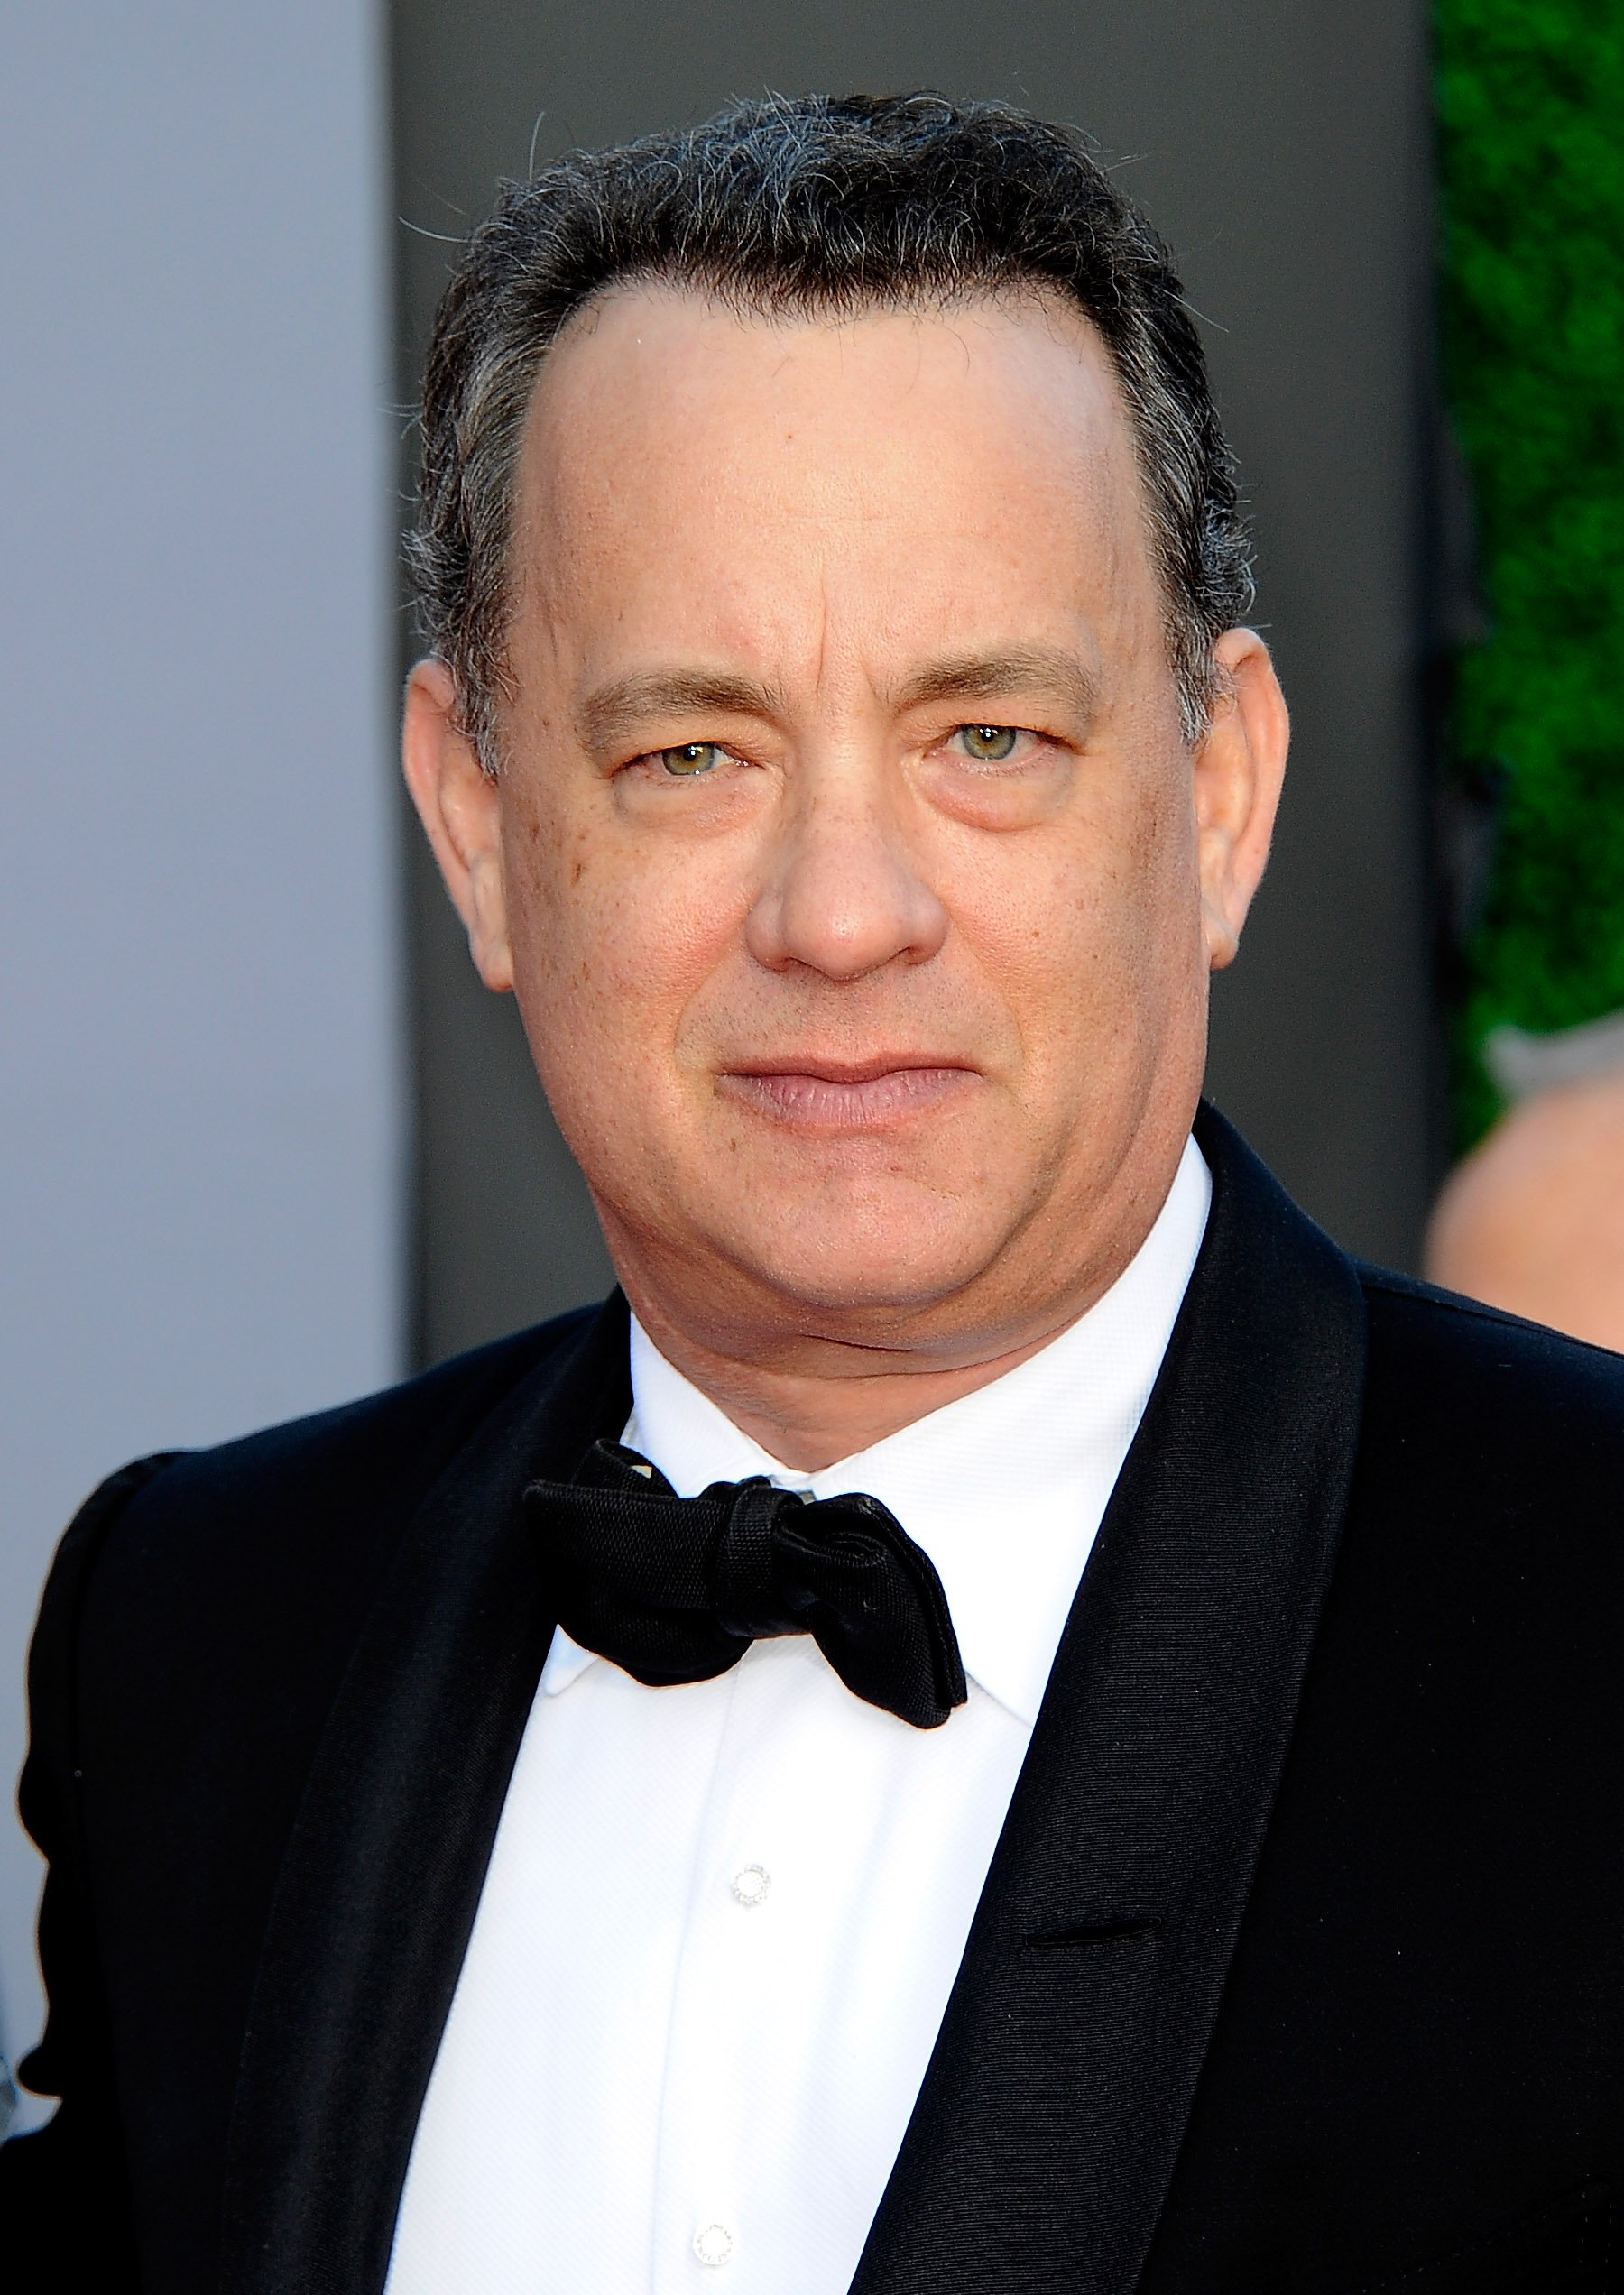 Tom Hanks at the BAFTA Brits To Watch event on July 9, 2011, in Los Angeles | Photo: Getty Images